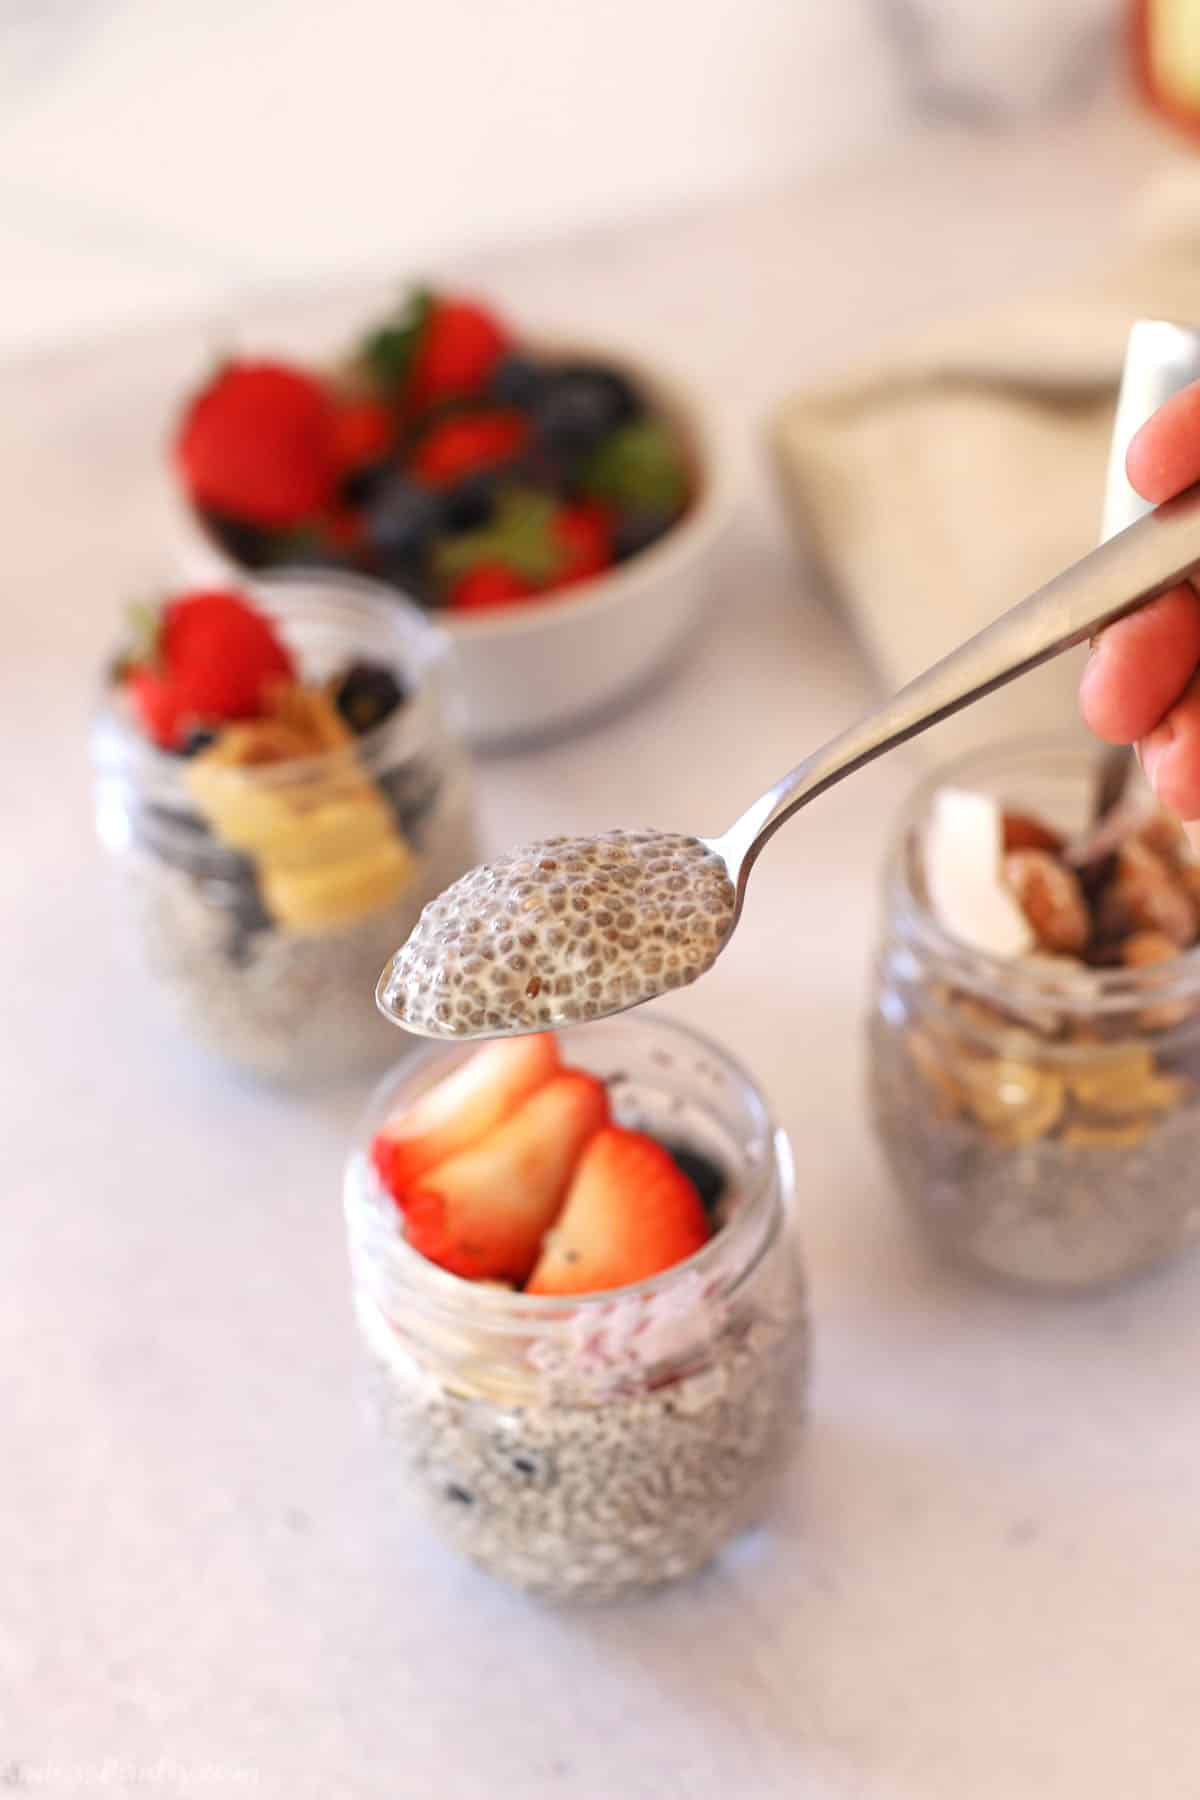 A spoon with some chia pudding to show texture.